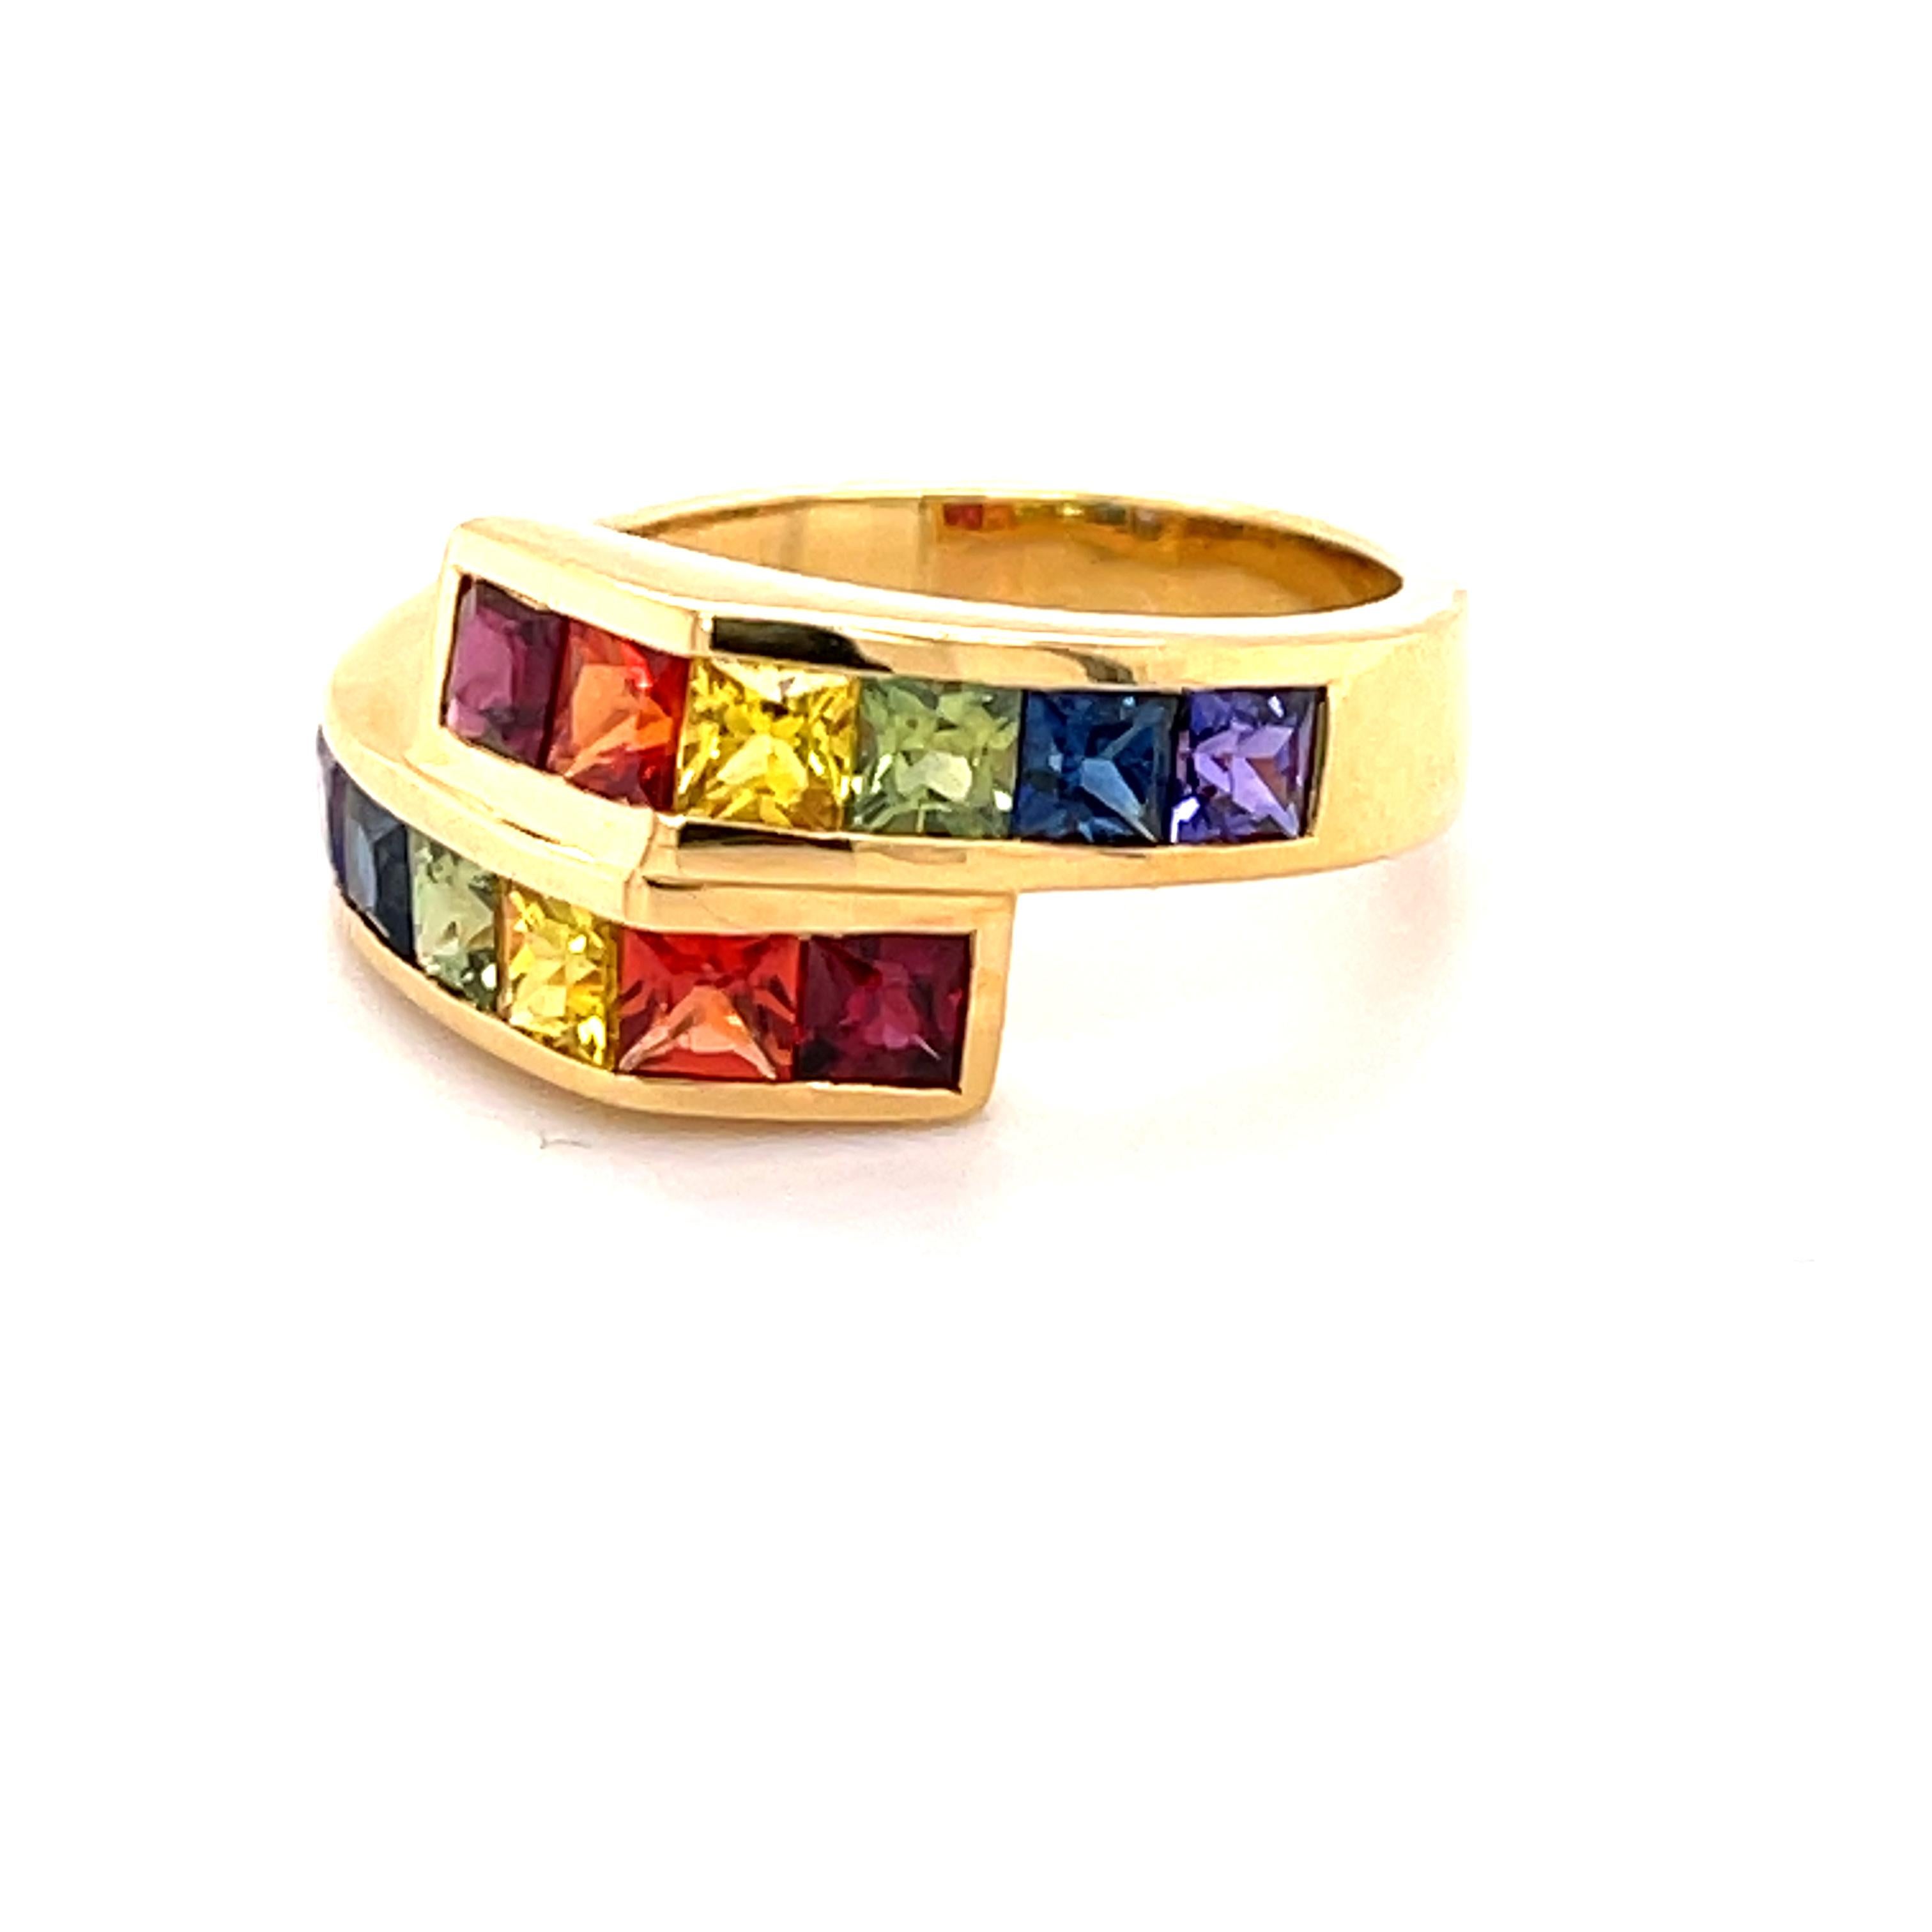 Vance Gem has been making multi-color Sapphire jewelry for the last 15 years.  On line, you will find a lot of different makers with a similar look. We only use very nice colored stones and all the pieces are done in 18-karat gold.  
The ring in the